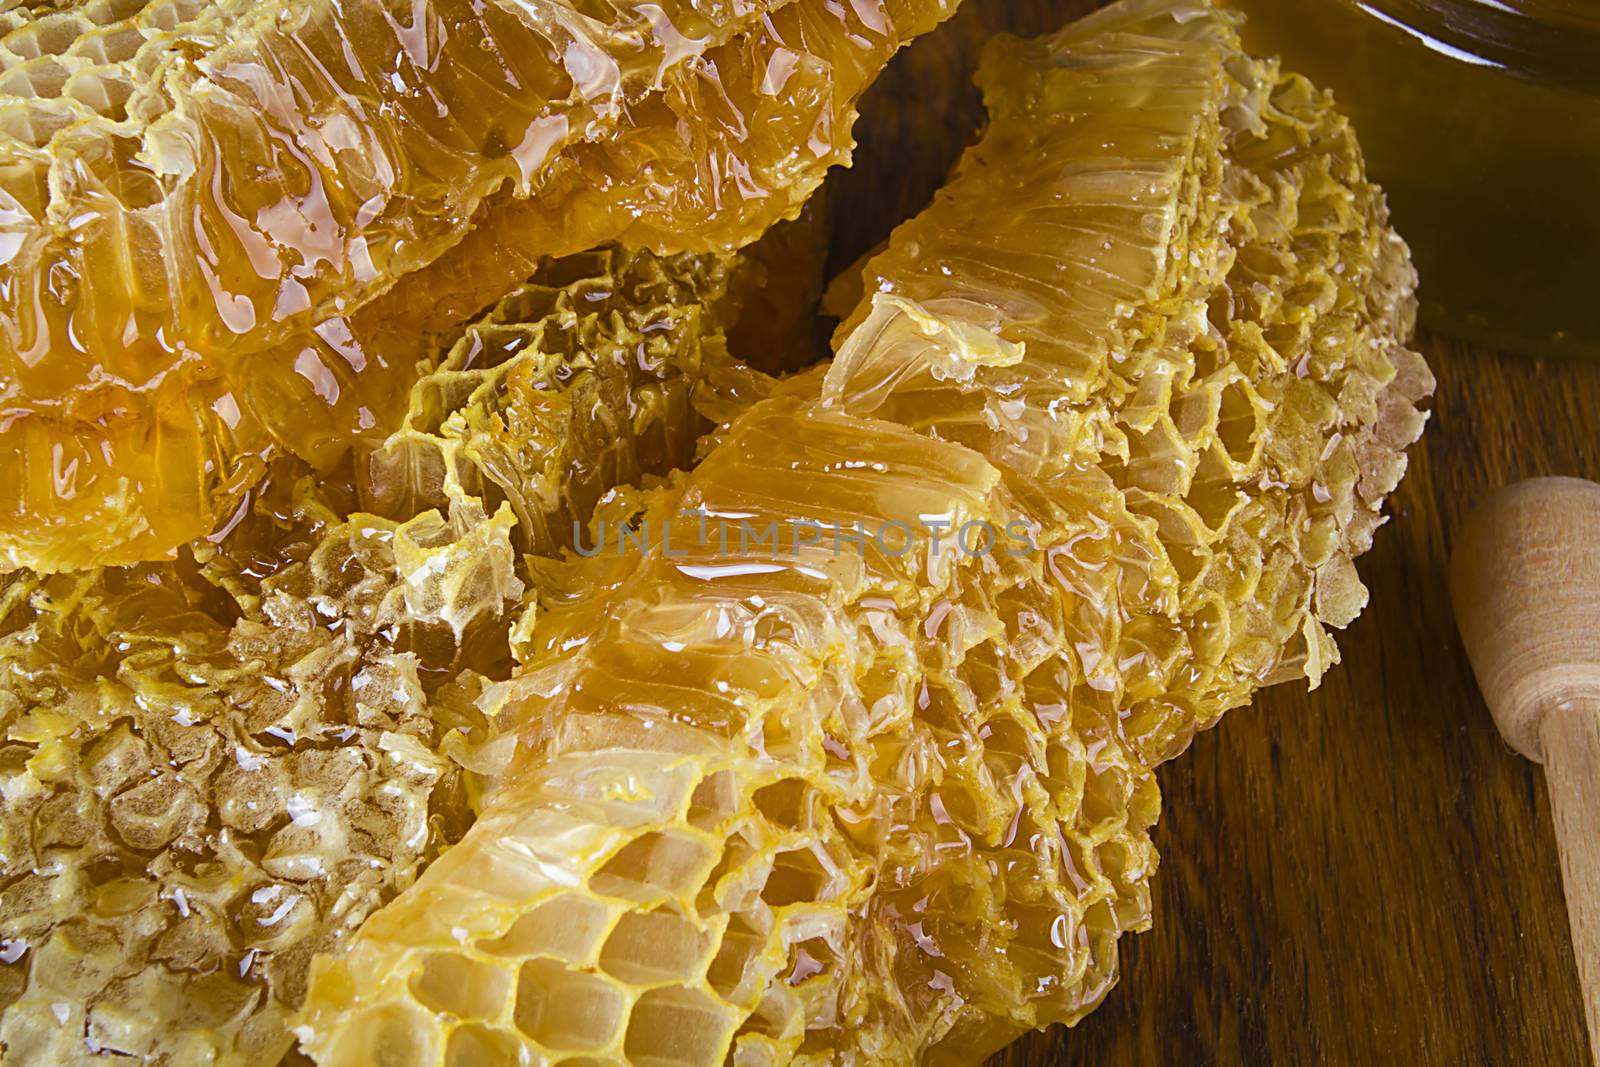 Yellow Honey and Honeycomb slice on a wooden table